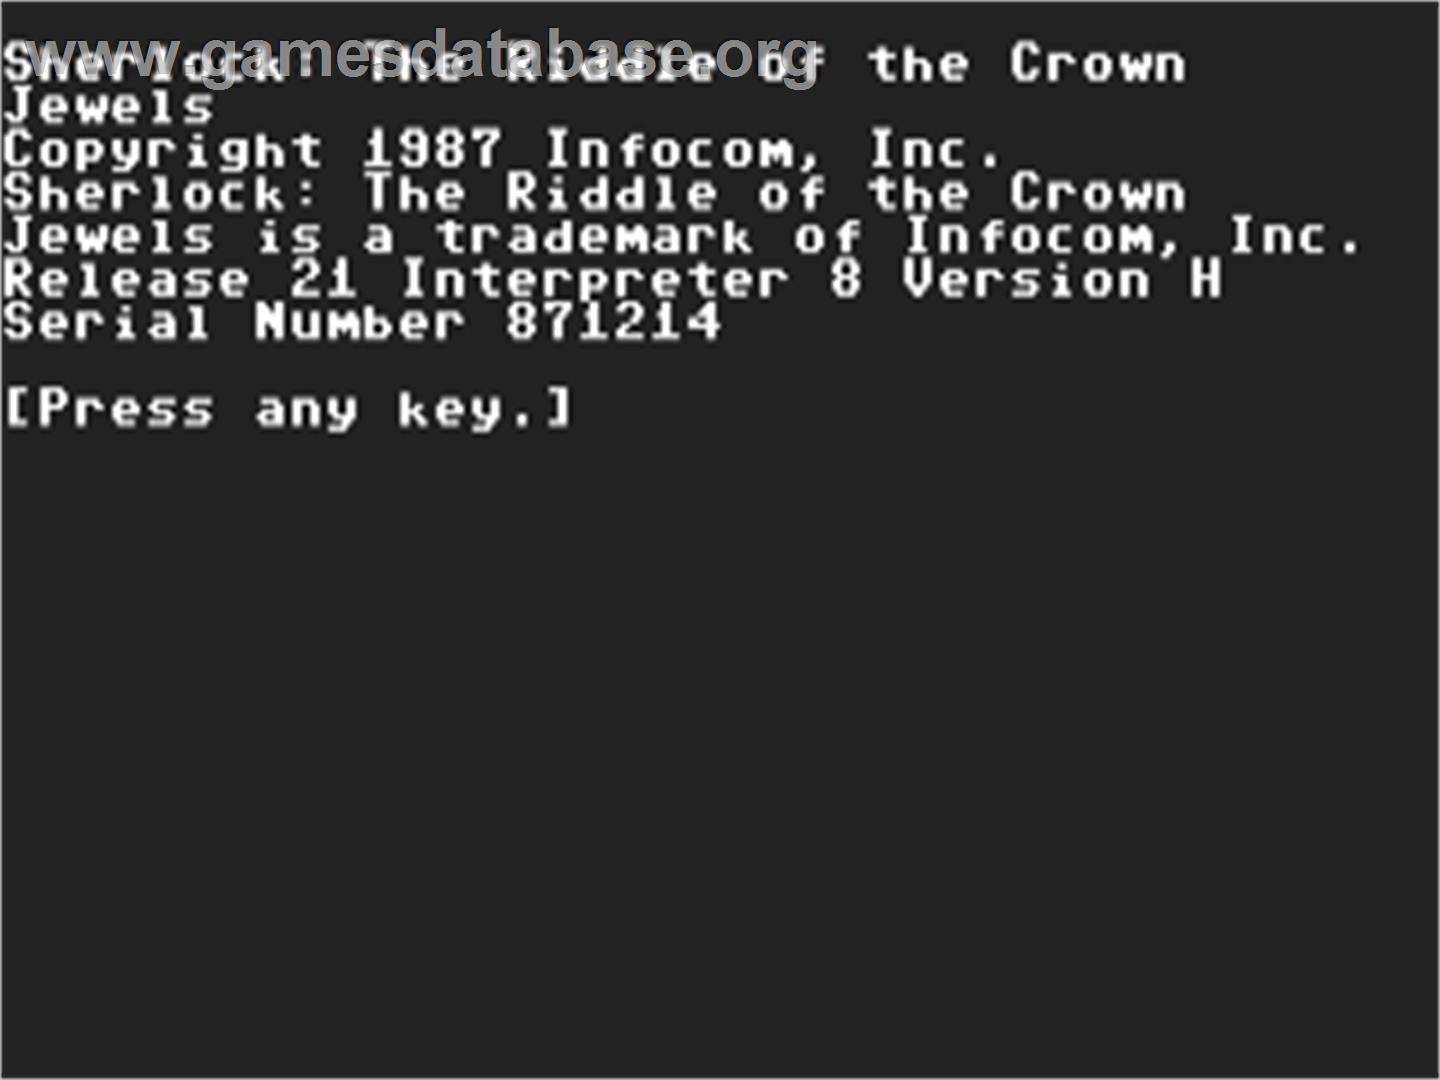 Sherlock: The Riddle of the Crown Jewels - Commodore 64 - Artwork - Title Screen